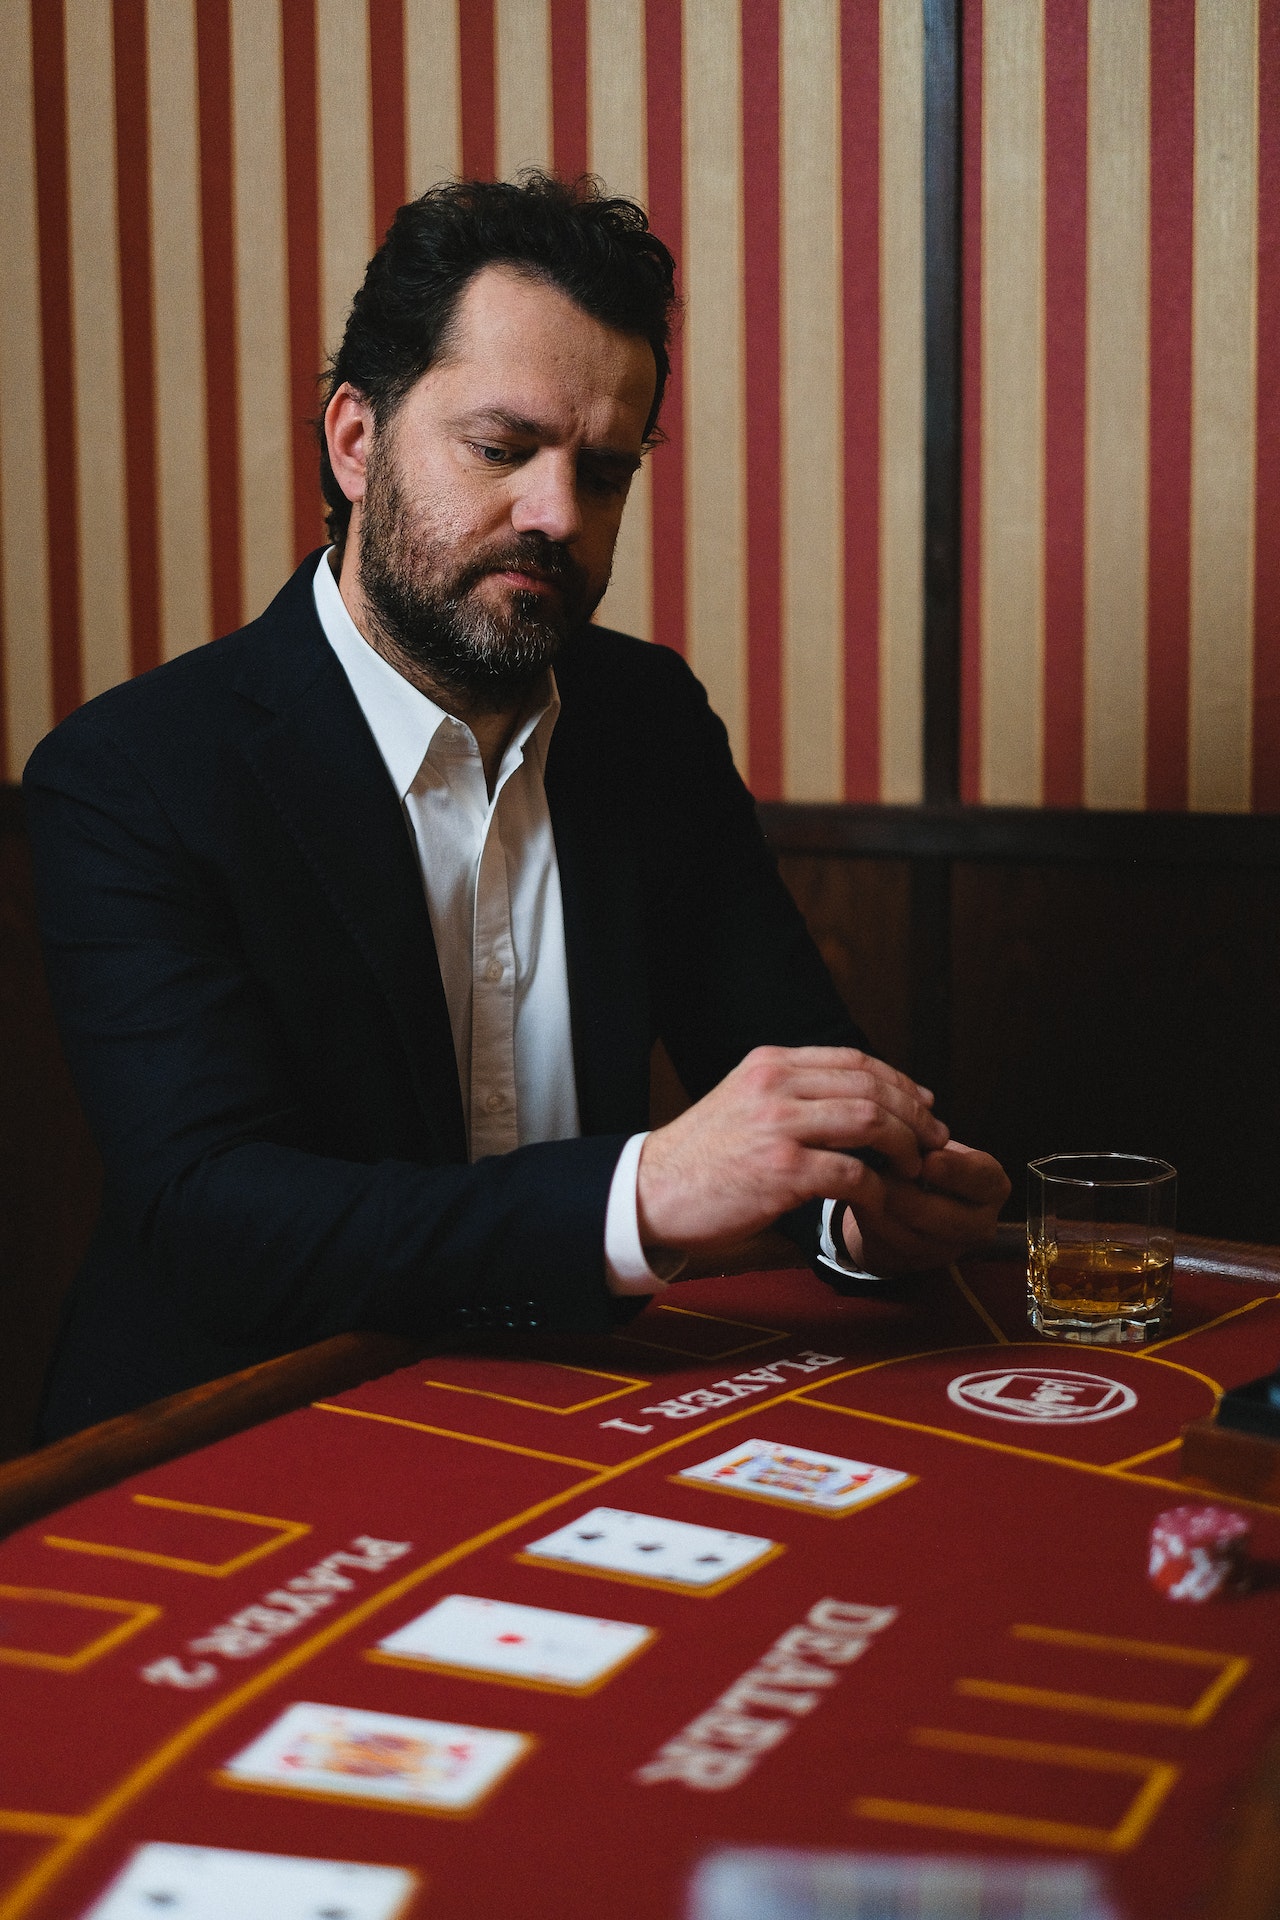 Man with a suit playing blackjack